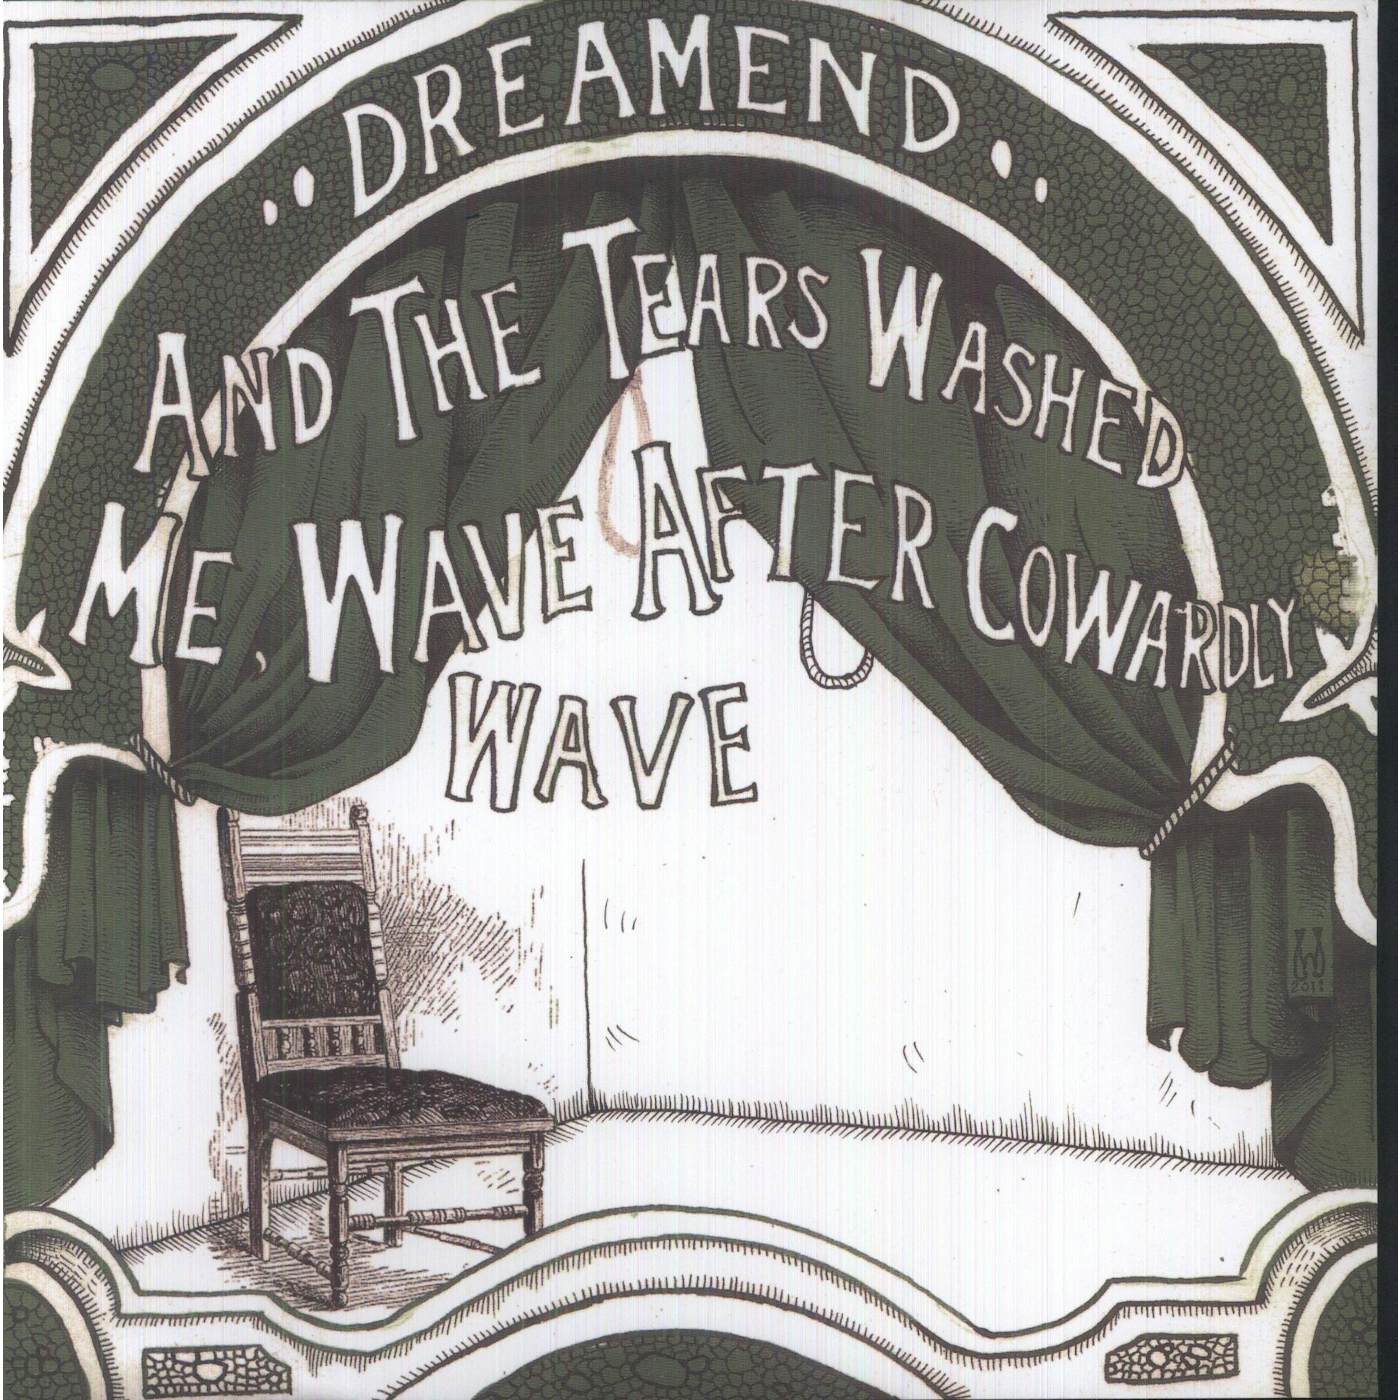 Dreamend THE TEARS WASHED ME WAVE AFTER COWARDLY WAVE Vinyl Record